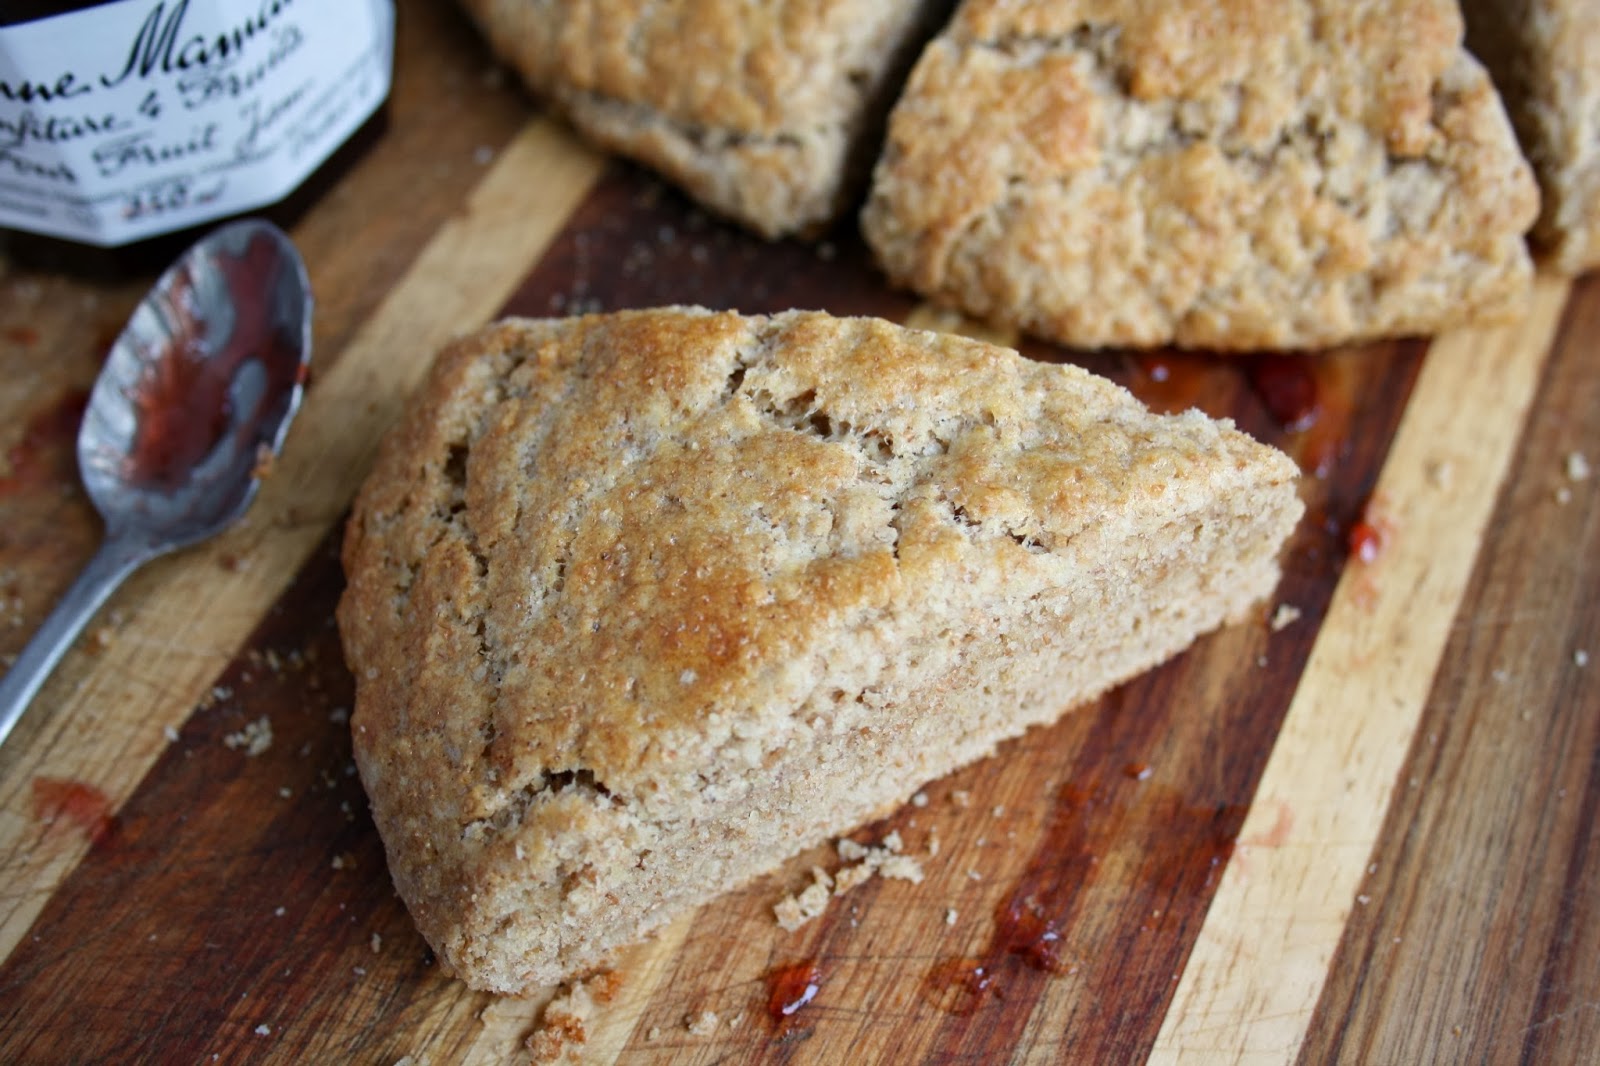 Scotch graham scones are sweet and wholesome